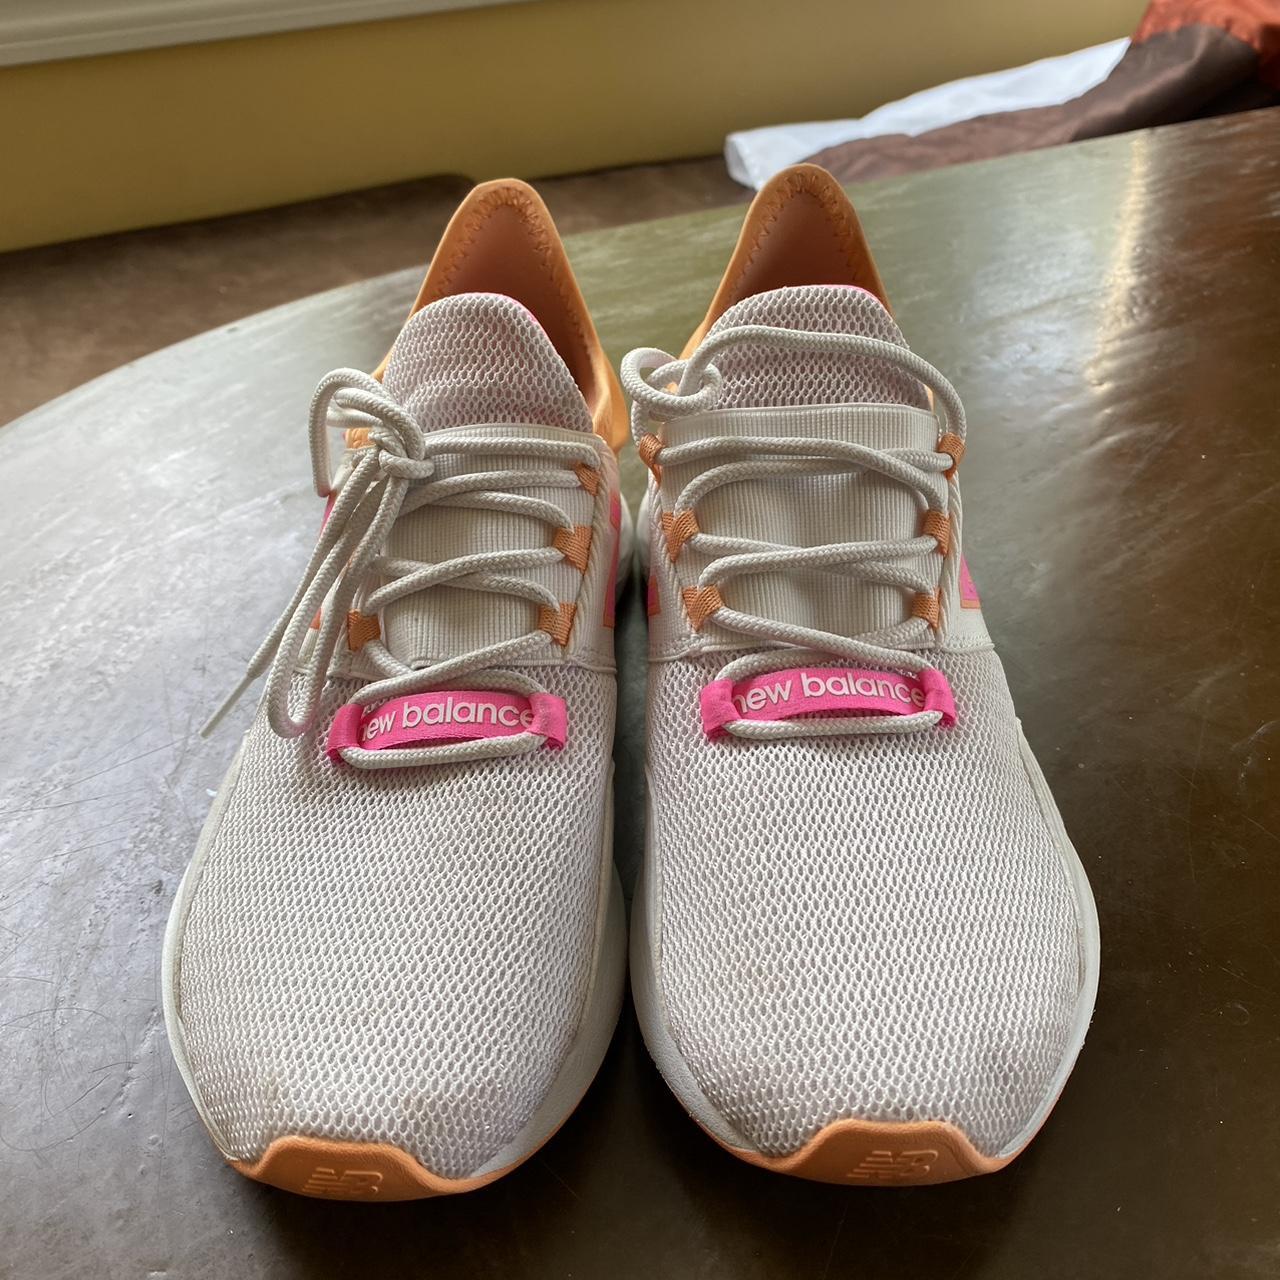 New Balance Women's White and Pink Trainers (2)